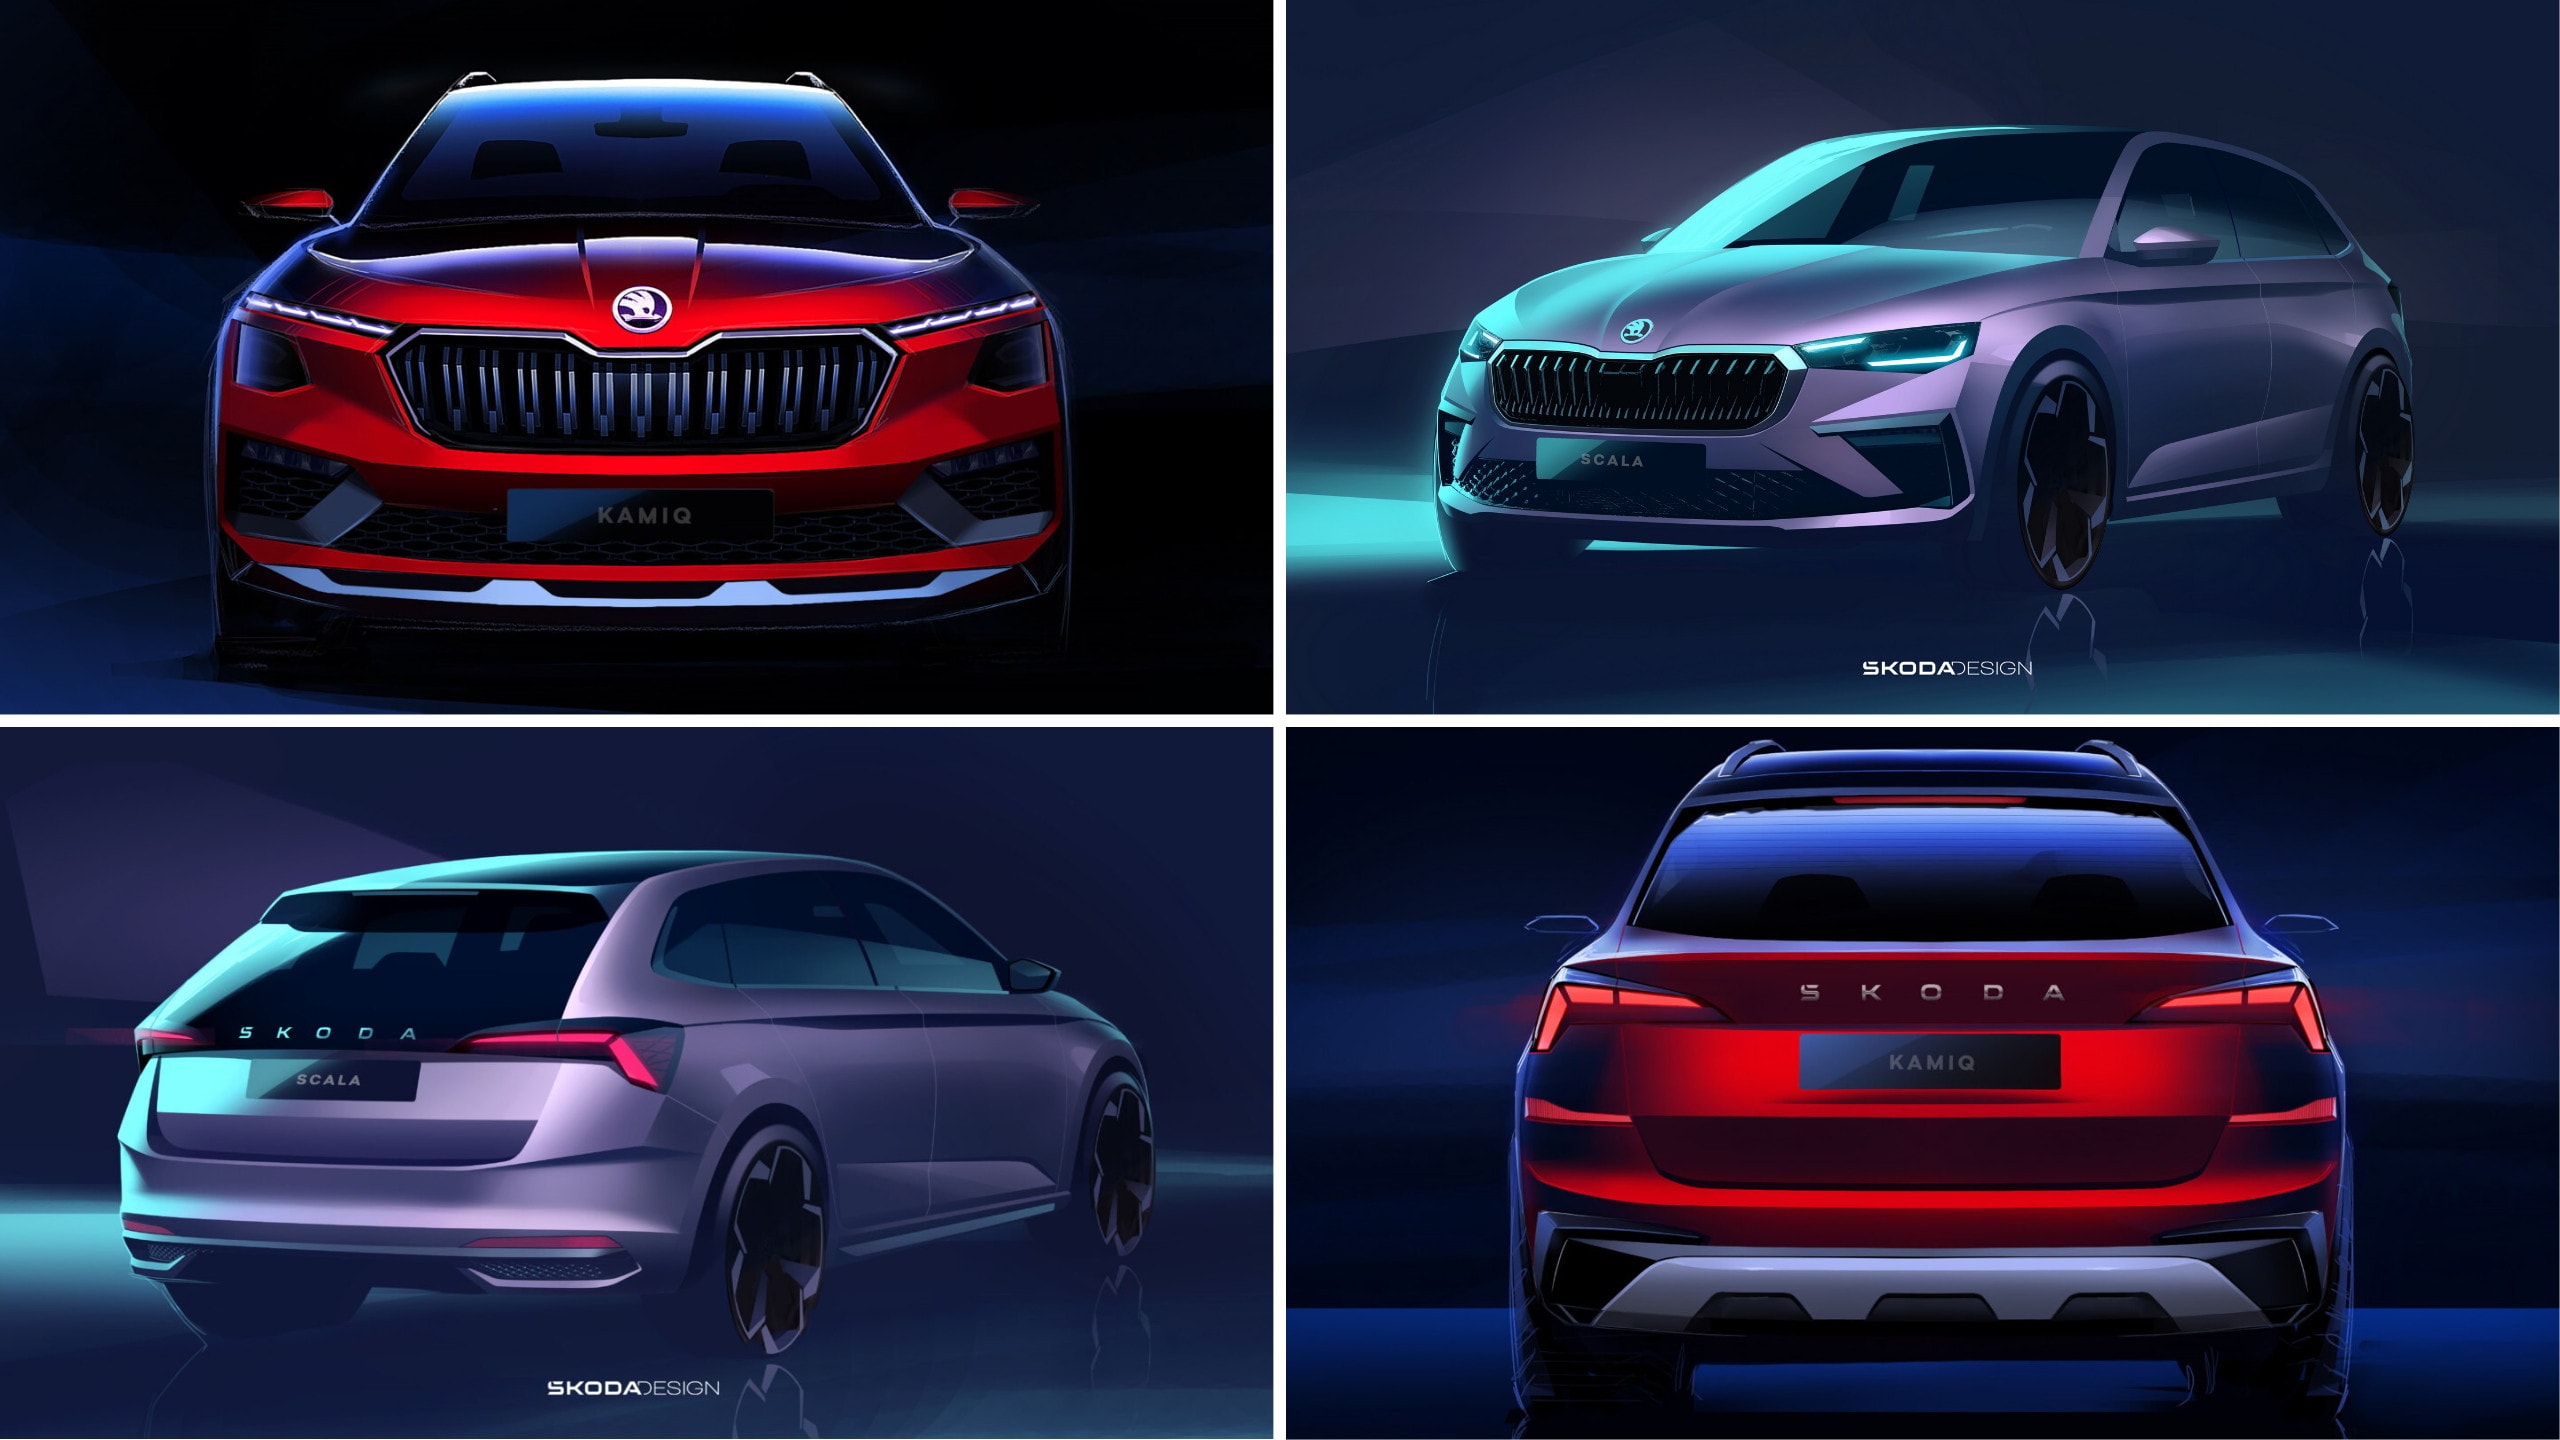 https://s1.cdn.autoevolution.com/images/news/skoda-scala-and-kamiq-getting-a-nip-tuck-on-august-1-official-teasers-reveal-what-s-new-218217_1.jpg